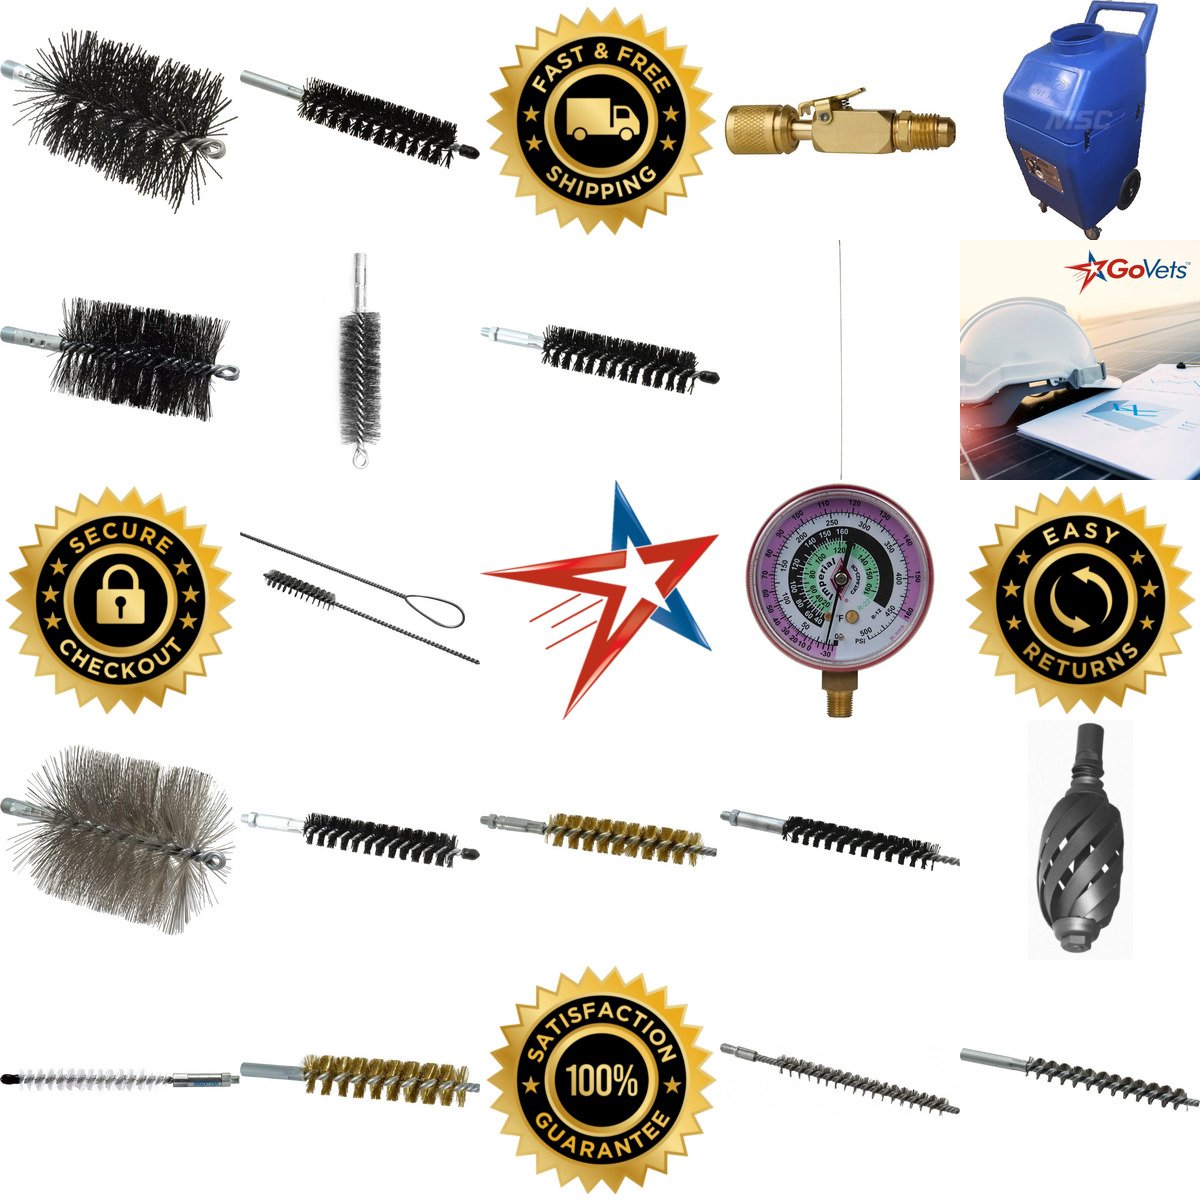 A selection of Hvac Maintenance Tools and Accessories products on GoVets